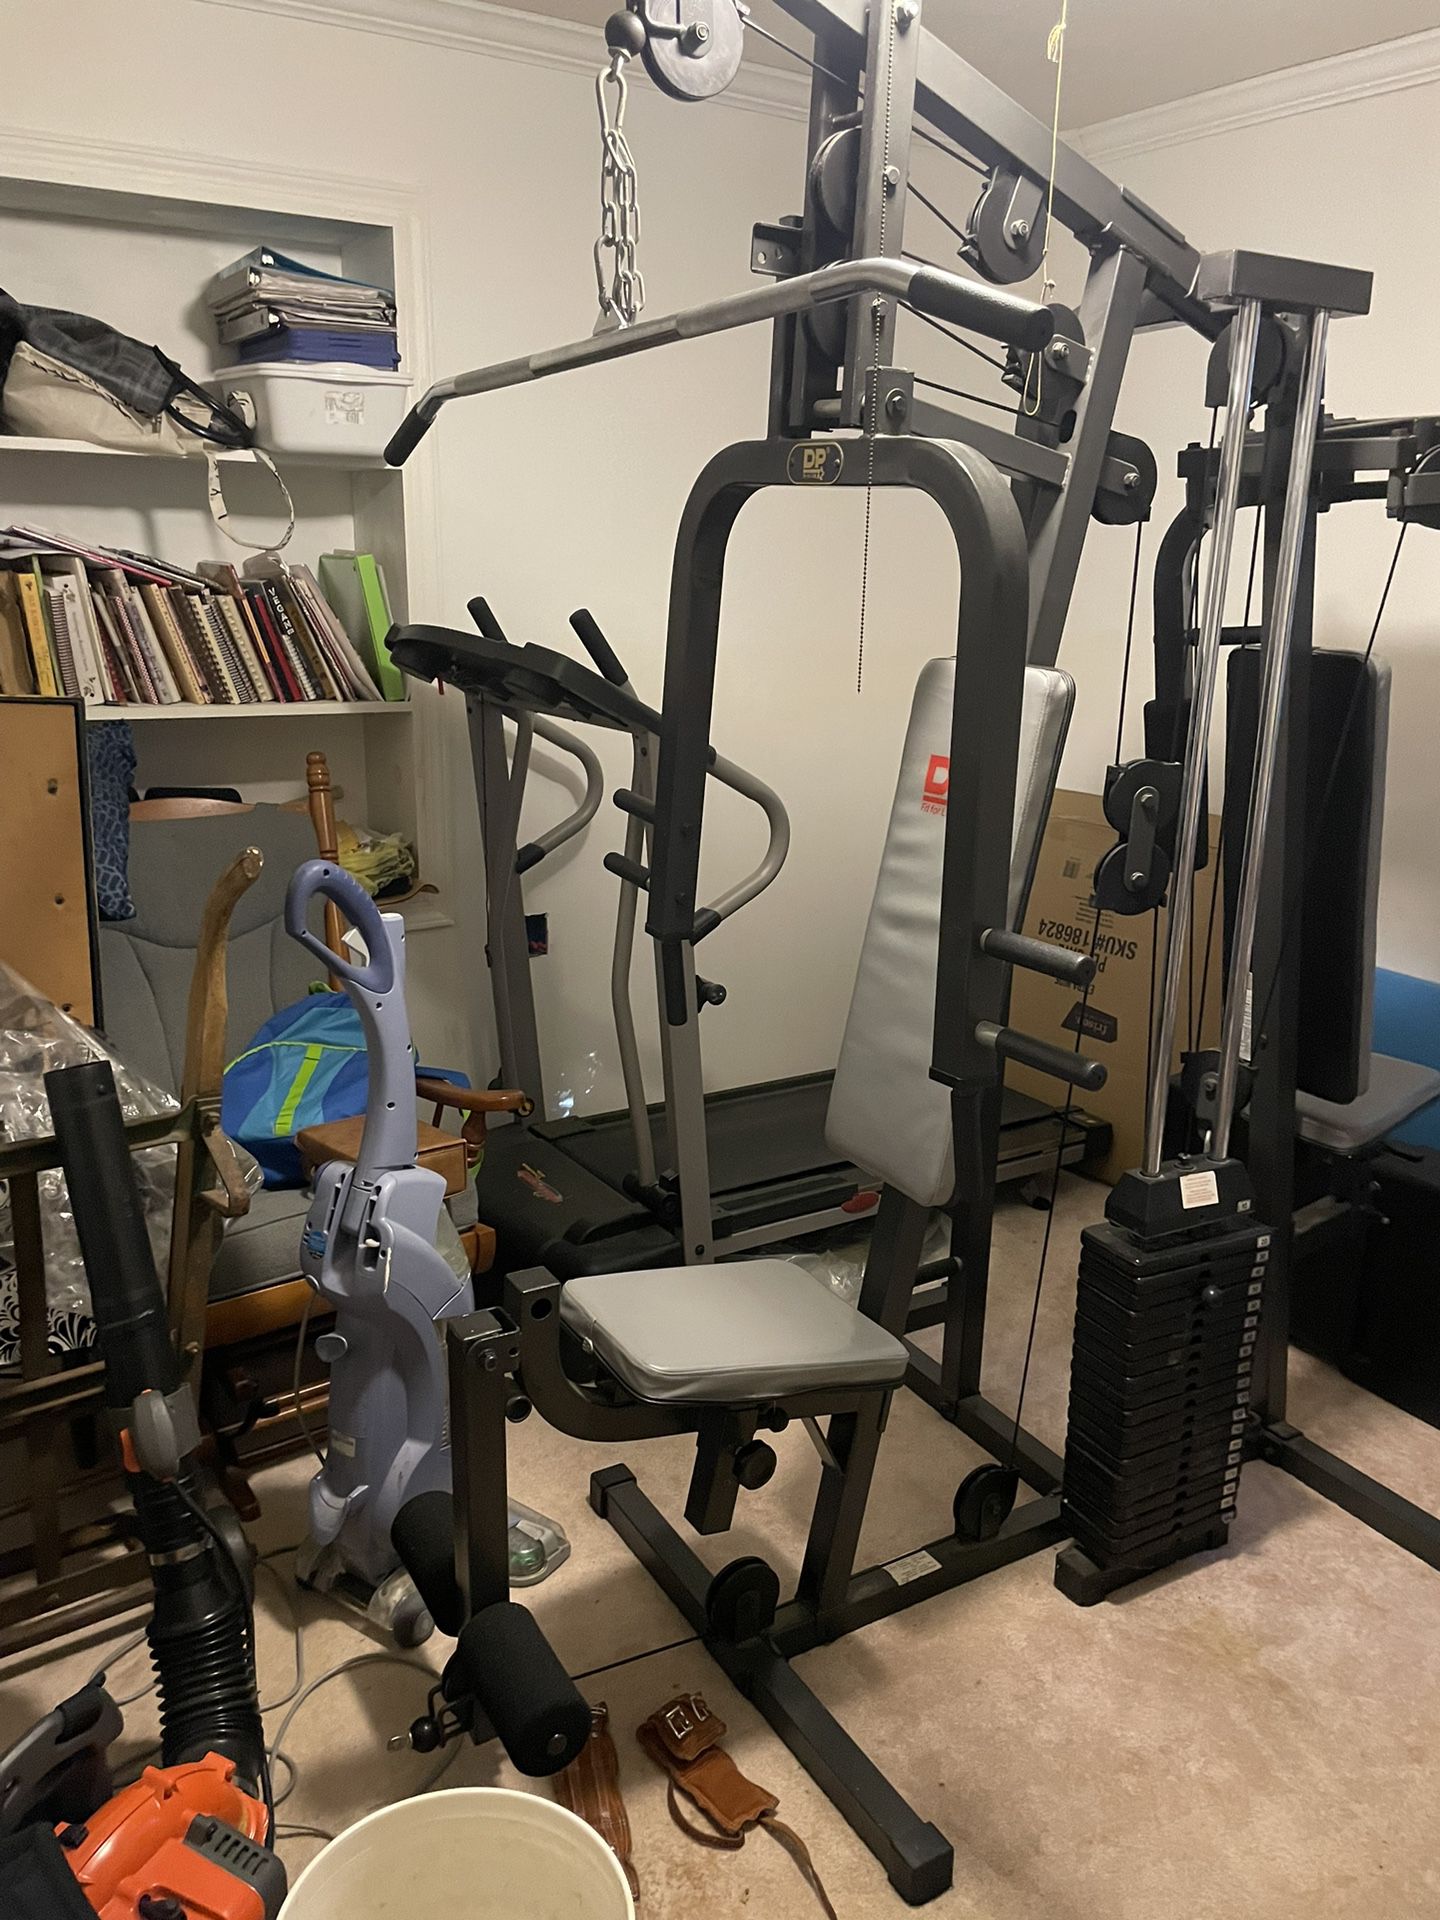 Workout Station 5 Lb To 200 Lb Weight. 